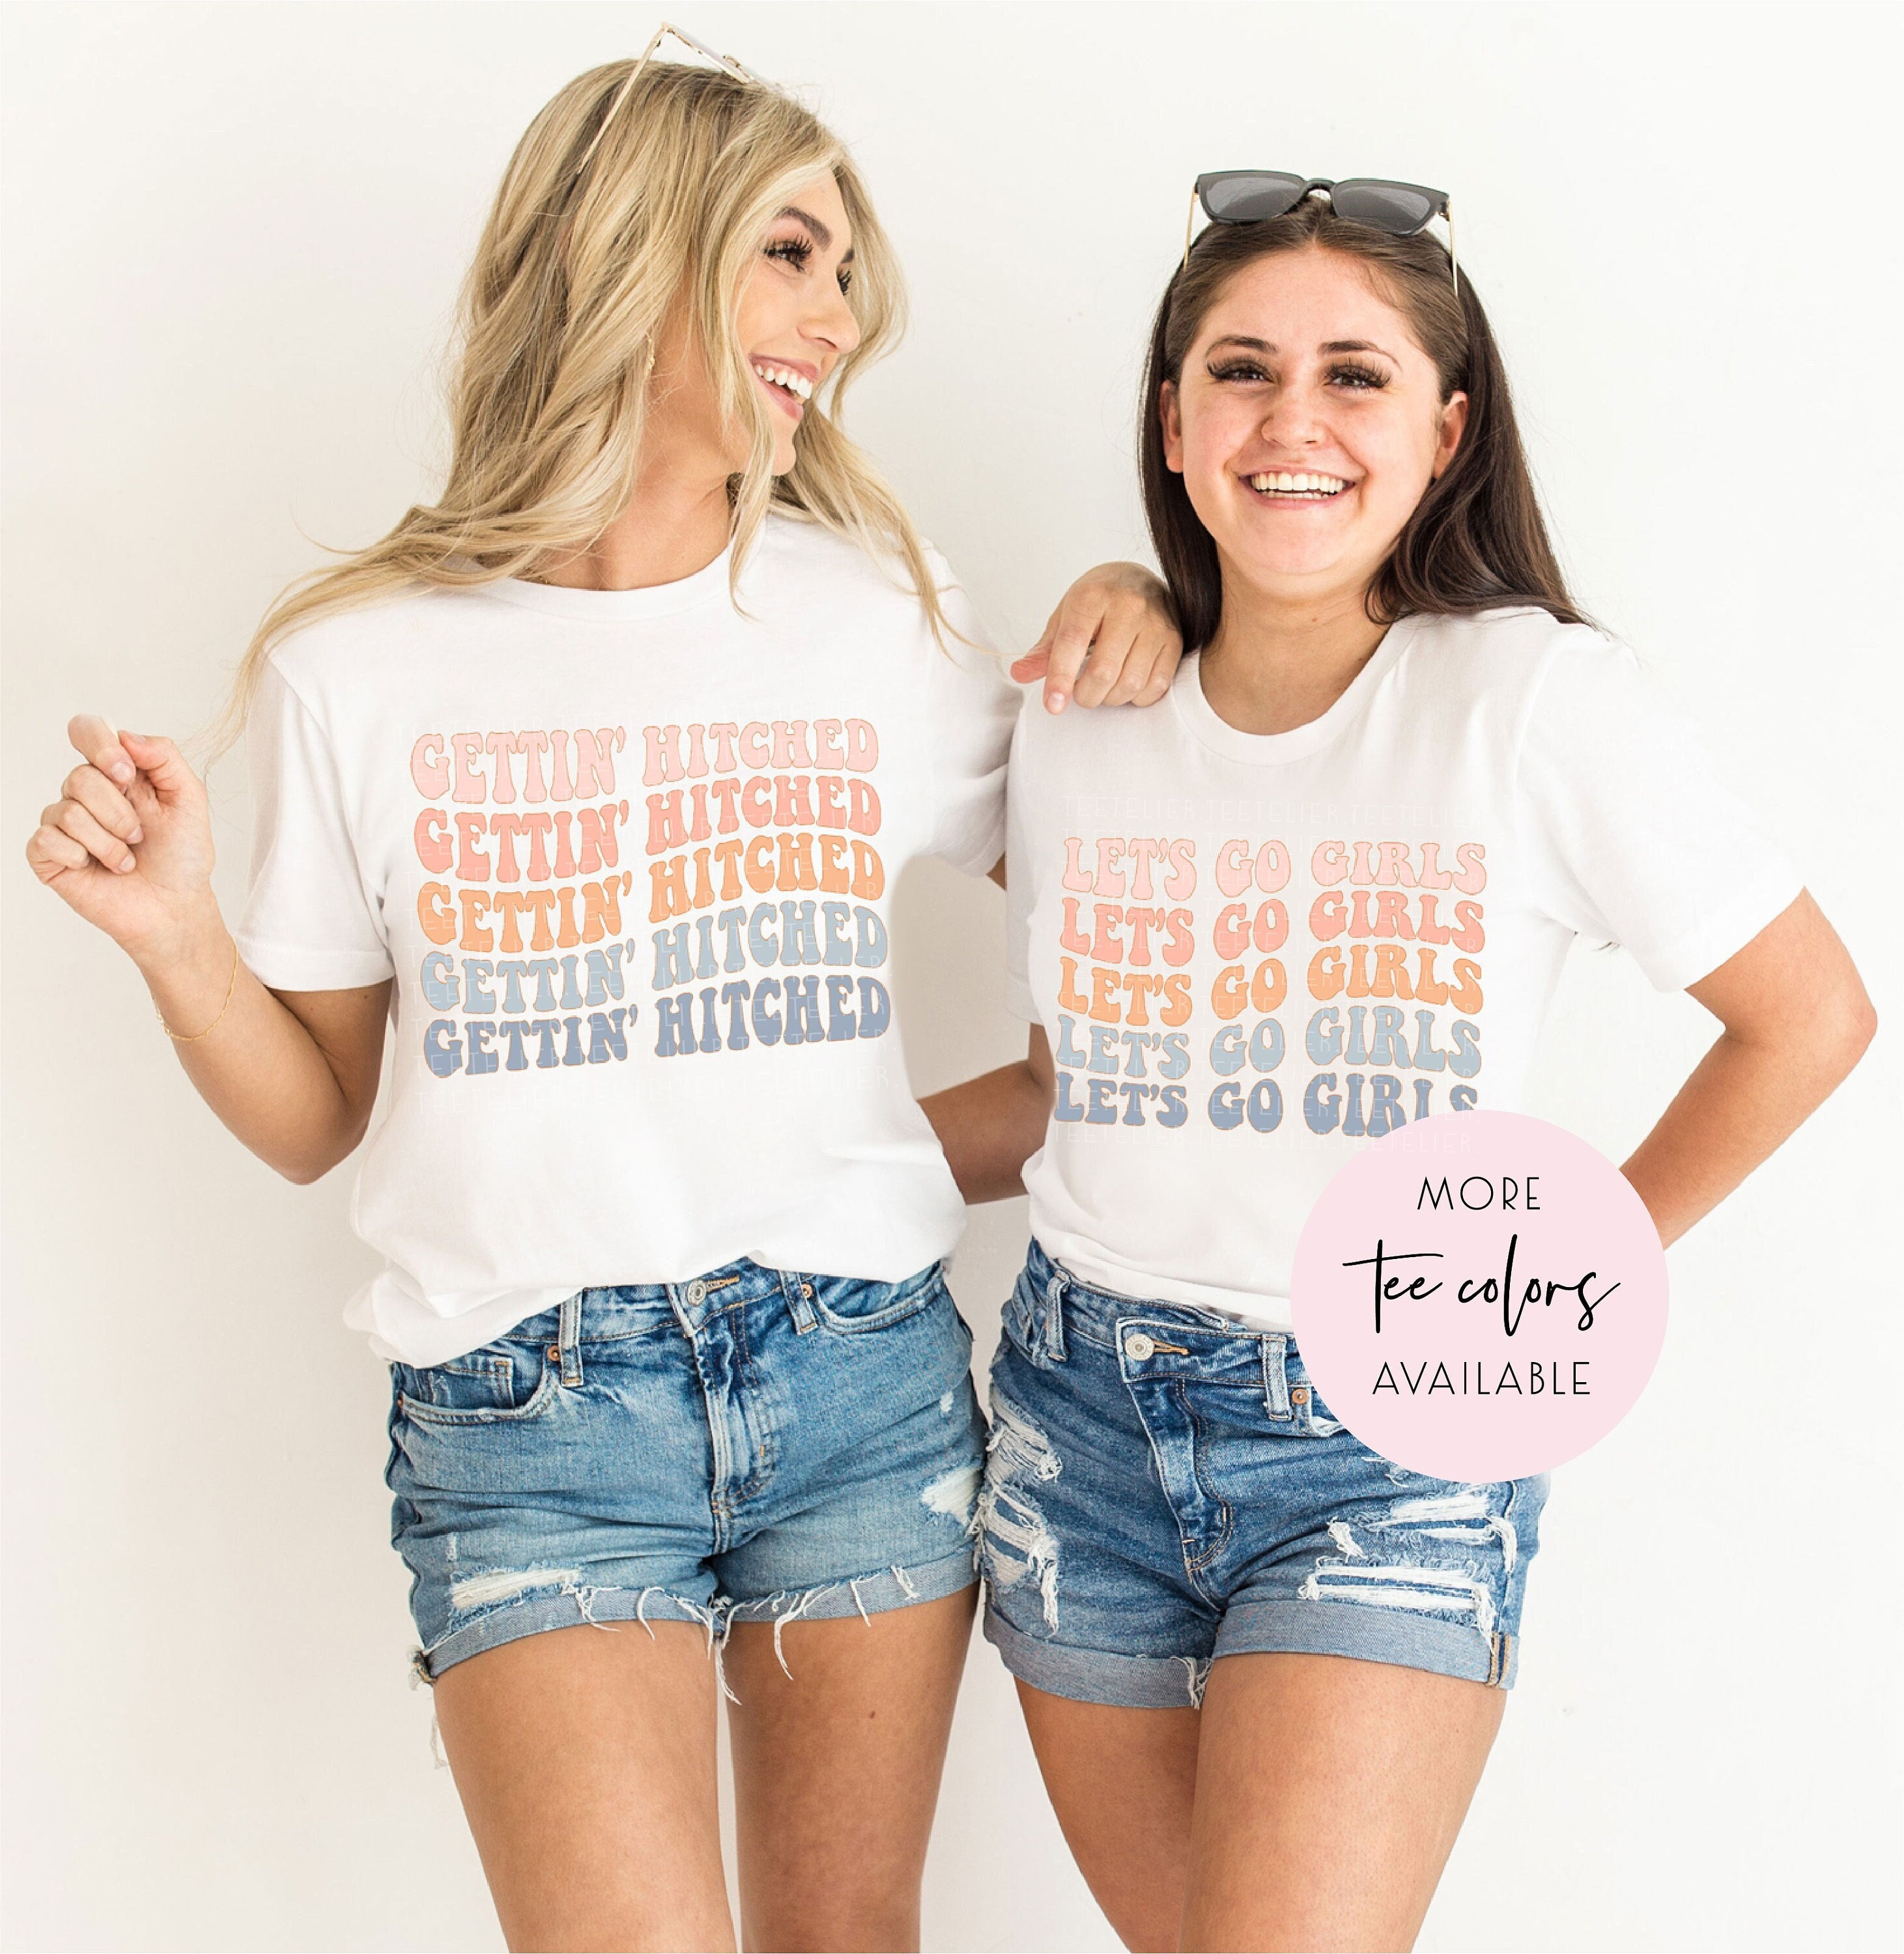 TeeTELIER Bachelorette Party Shirts, Let's Go Girls Graphic T-Shirt, Retro Graphic Tee, Gifts for Her, Gettin Hitched, Bridal Party Shirts, Girls Trip